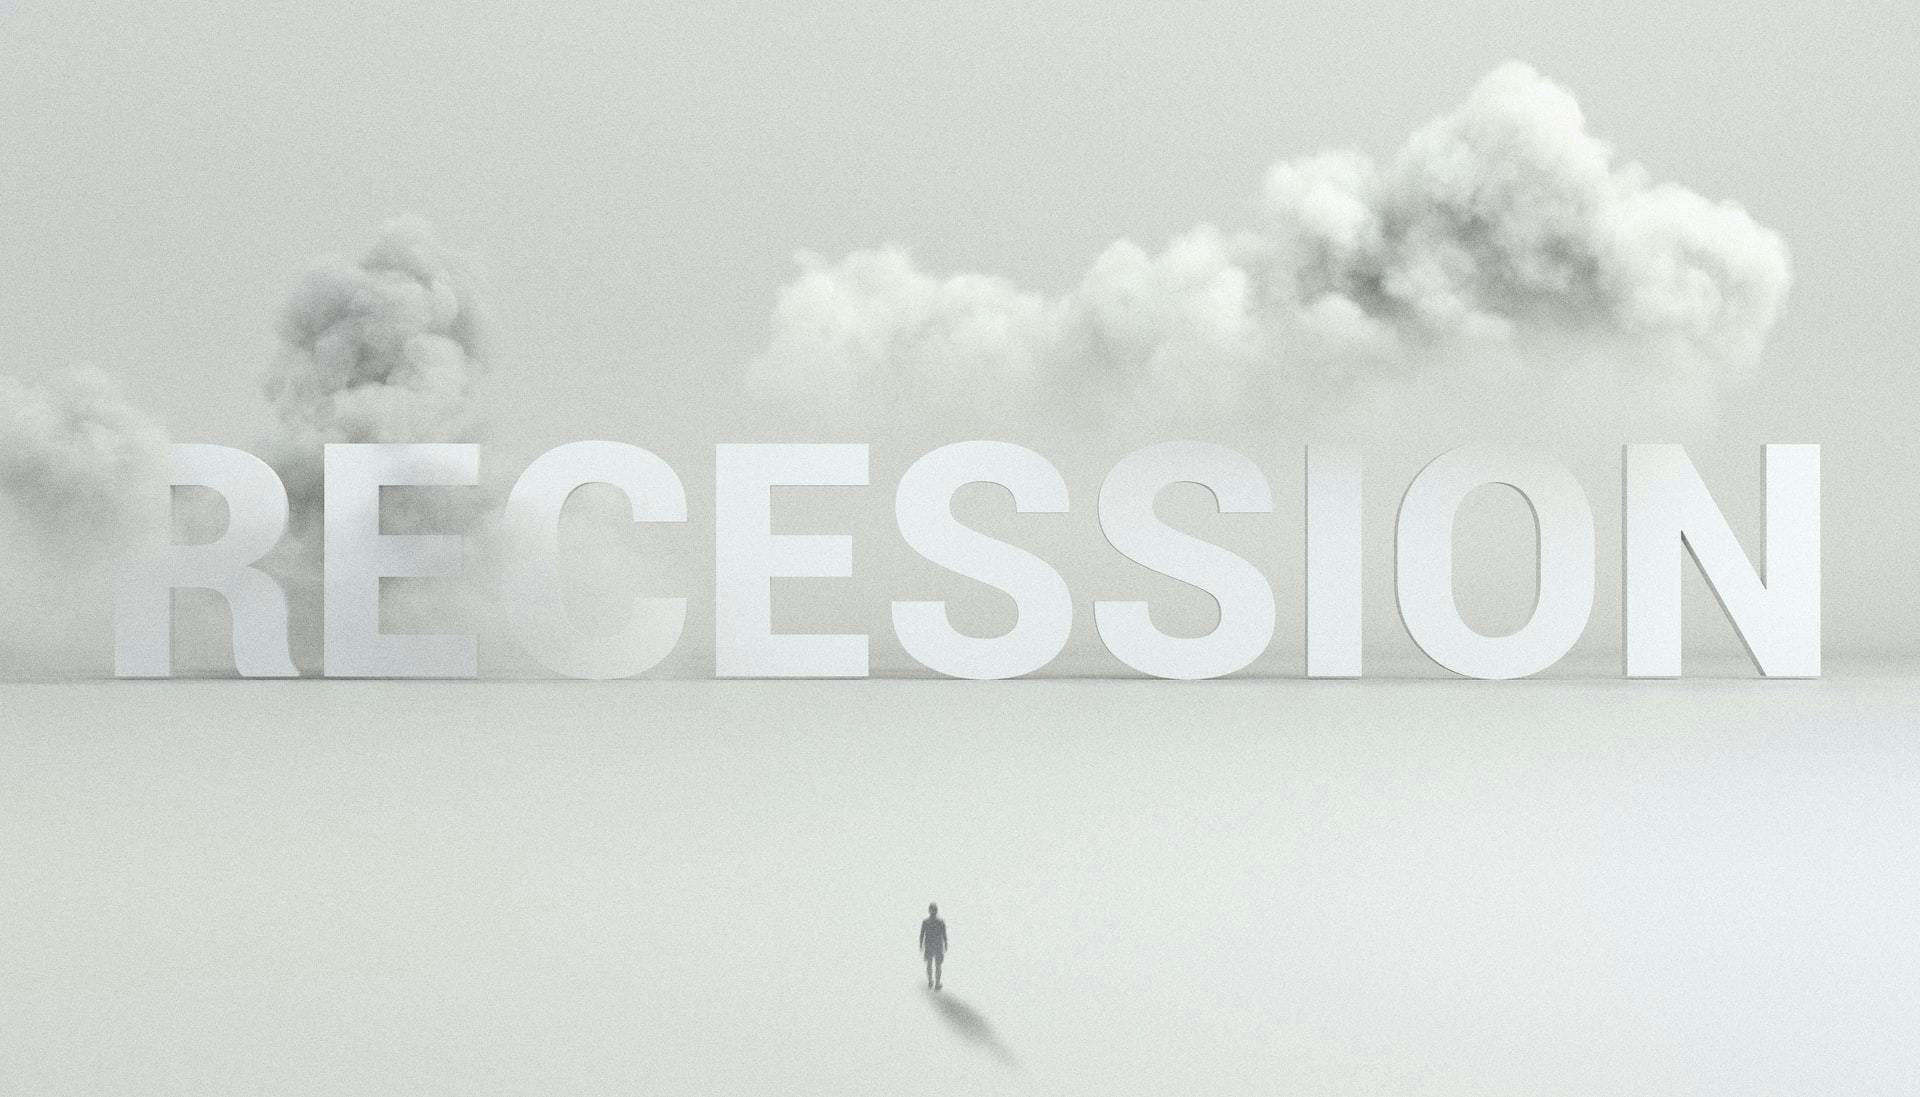 What Is A Recession? How Should We Prepare? – blog post image